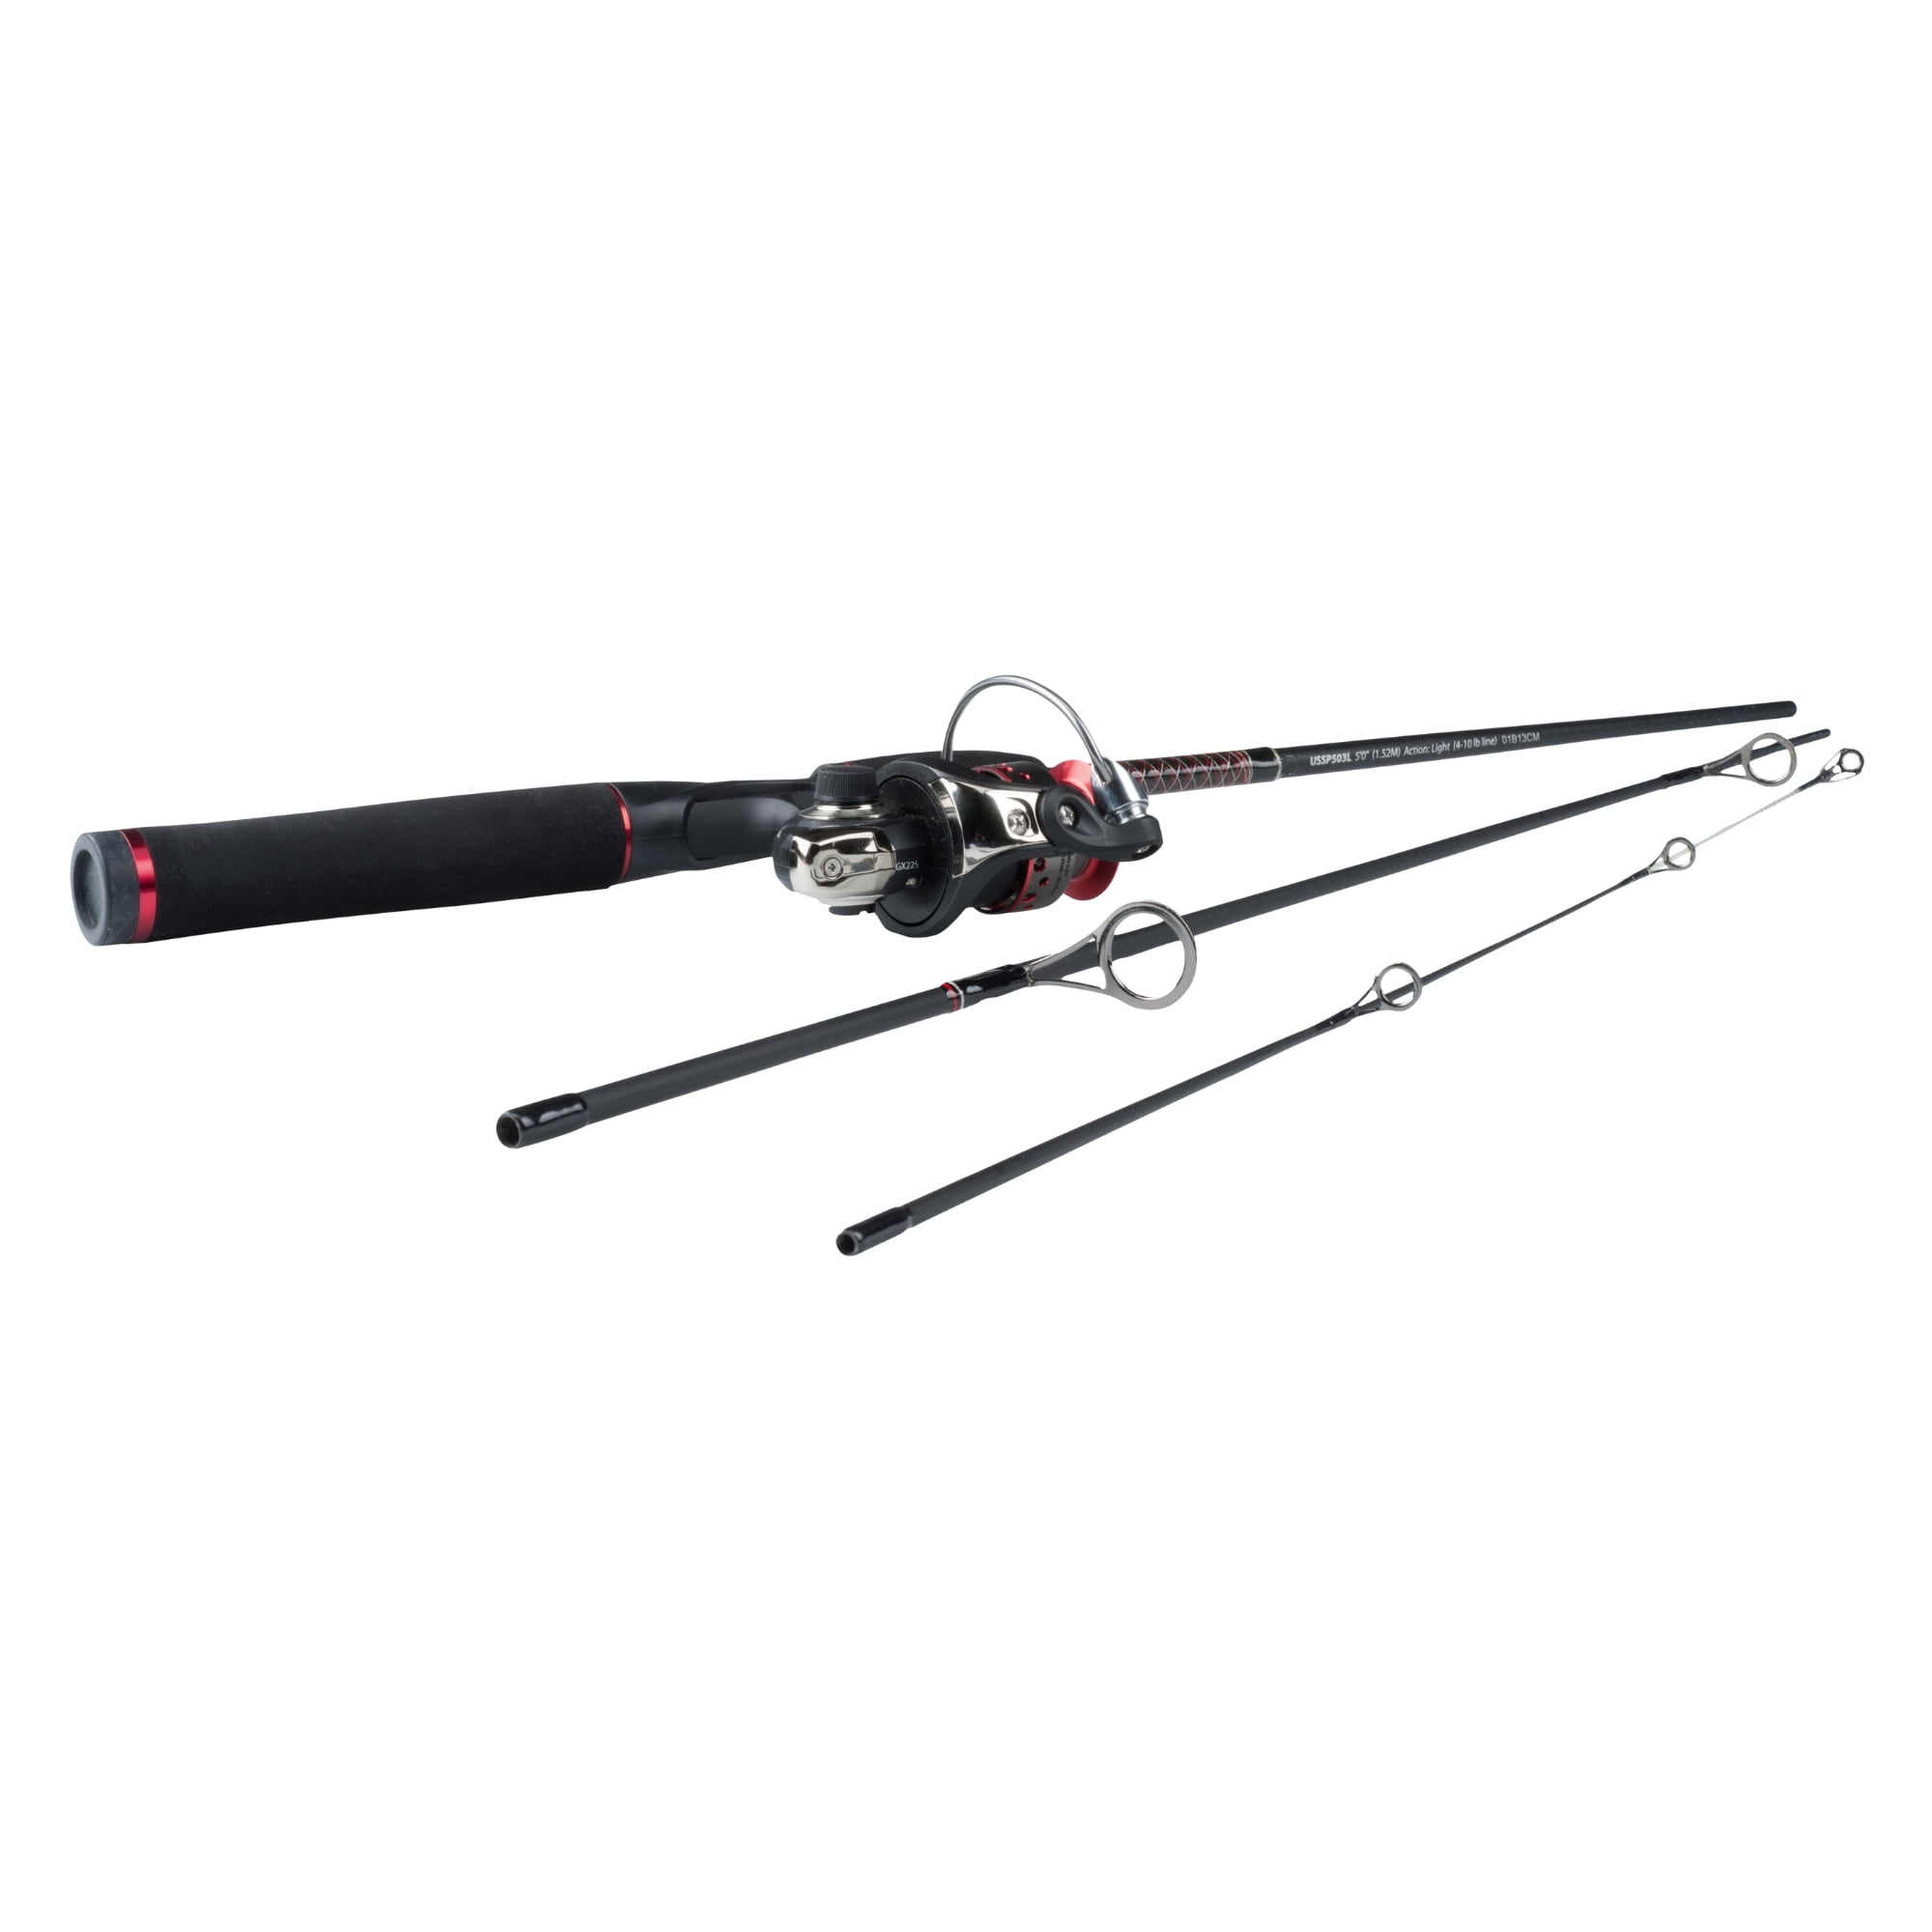 Ugly Stik 6'6” GX2 Travel Fishing Rod and Reel Spinning Combo